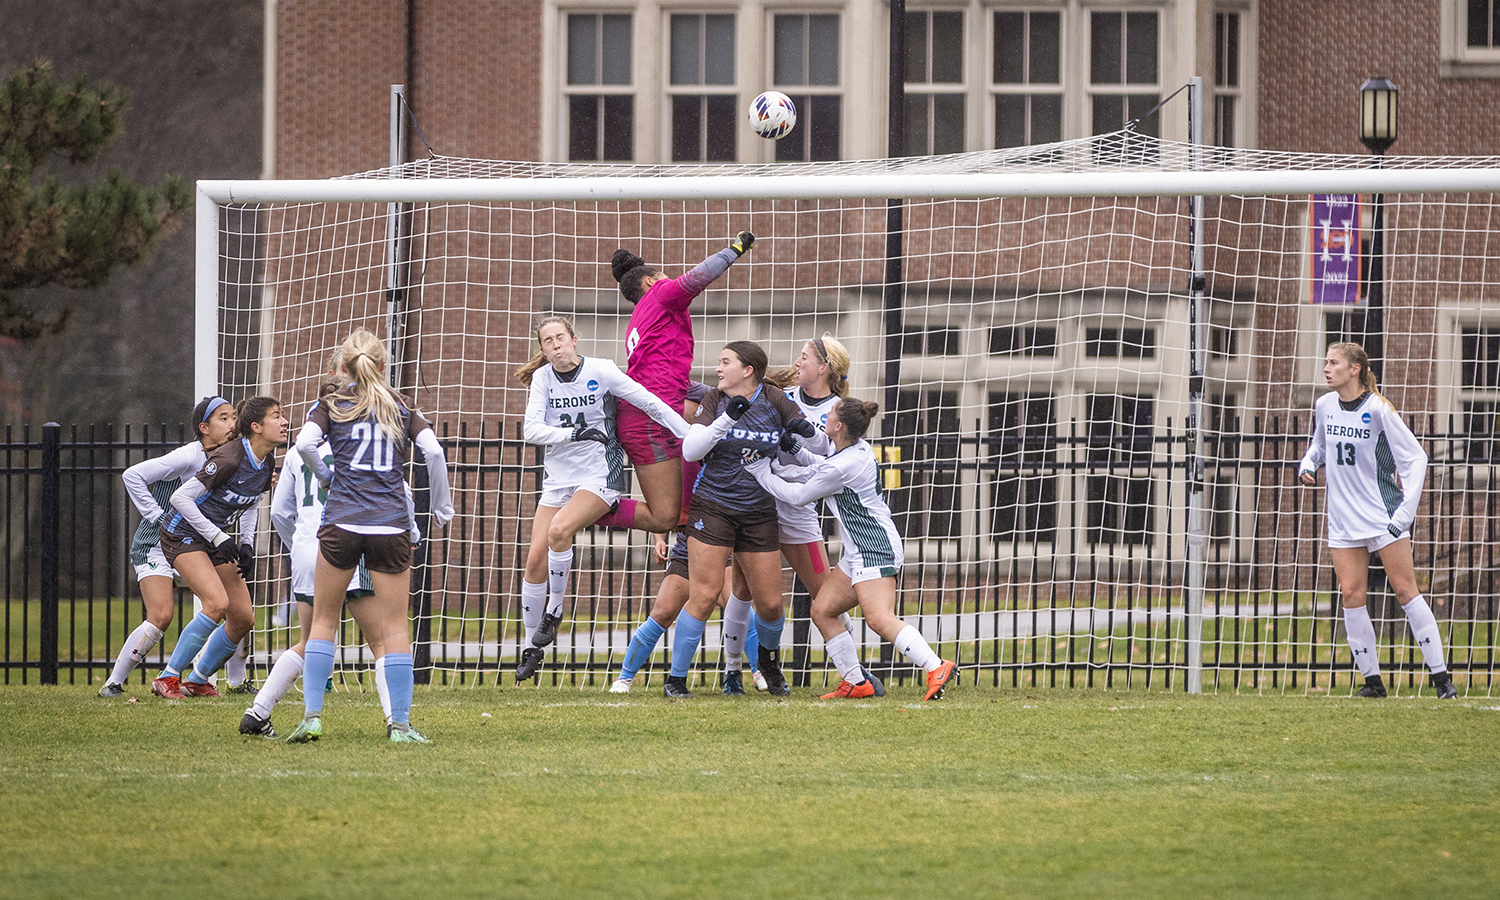 Kirsten Nelson ’24 punches a ball over the crossbar in William Smith’s 1-0 victory over Tufts in the second round of the NCAA tournament. The Herons will take on Amherst at Case Western Reserve University on Saturday.